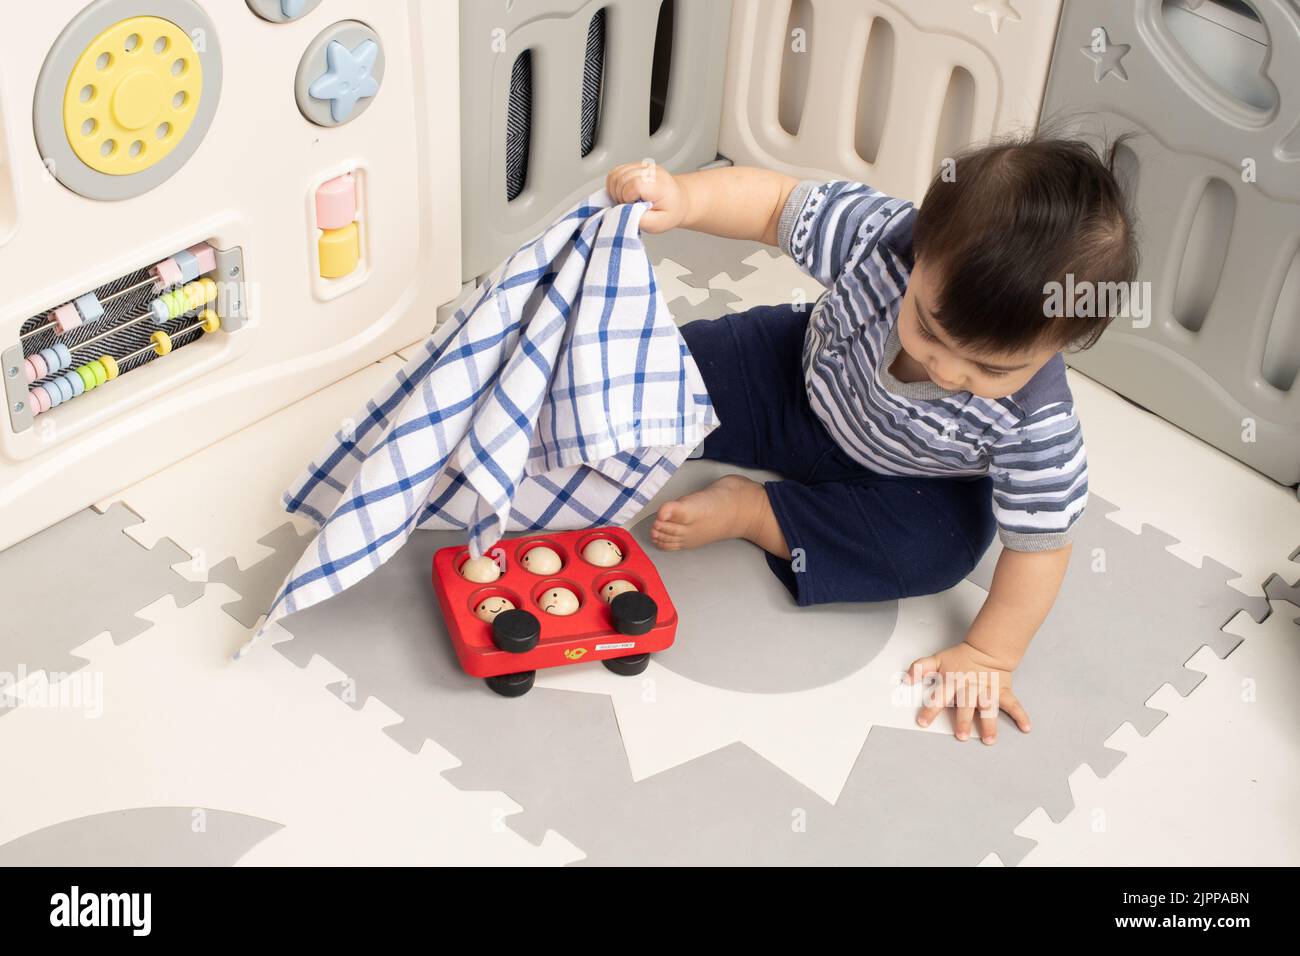 11 month old baby boy at home lifting cloth to find hidden toy Piaget Object Permanence series #2 Stock Photo